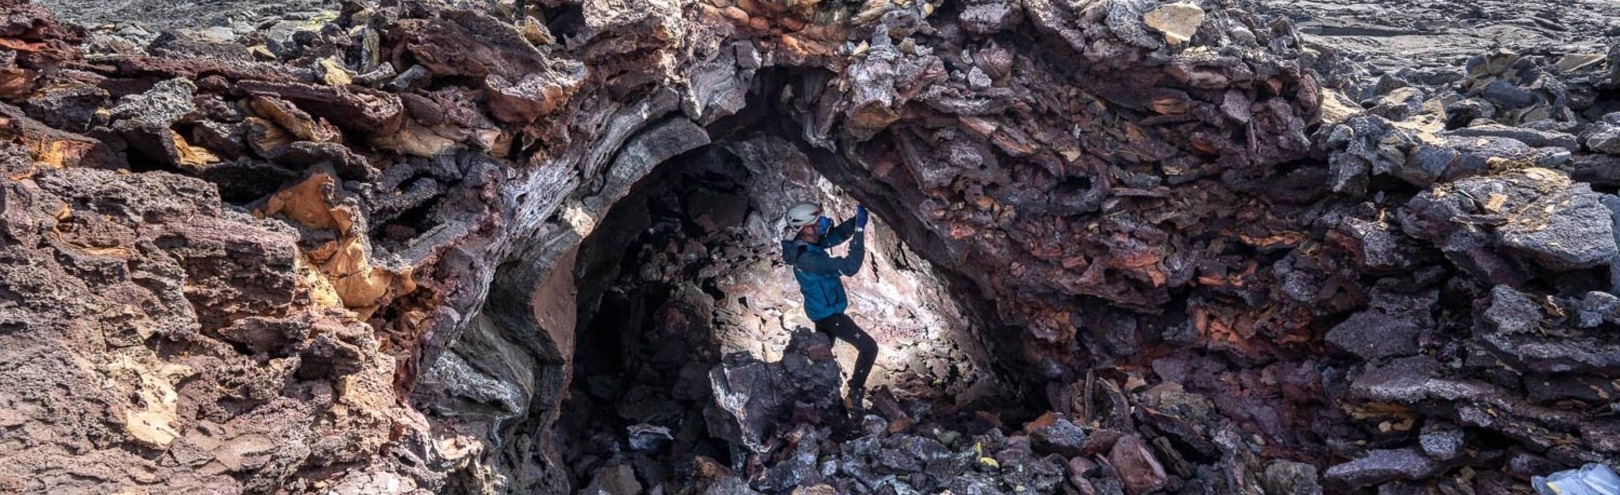 A grant to explore lava tubes of the Fagradalsfjall Volcano  - Available at University of Iceland